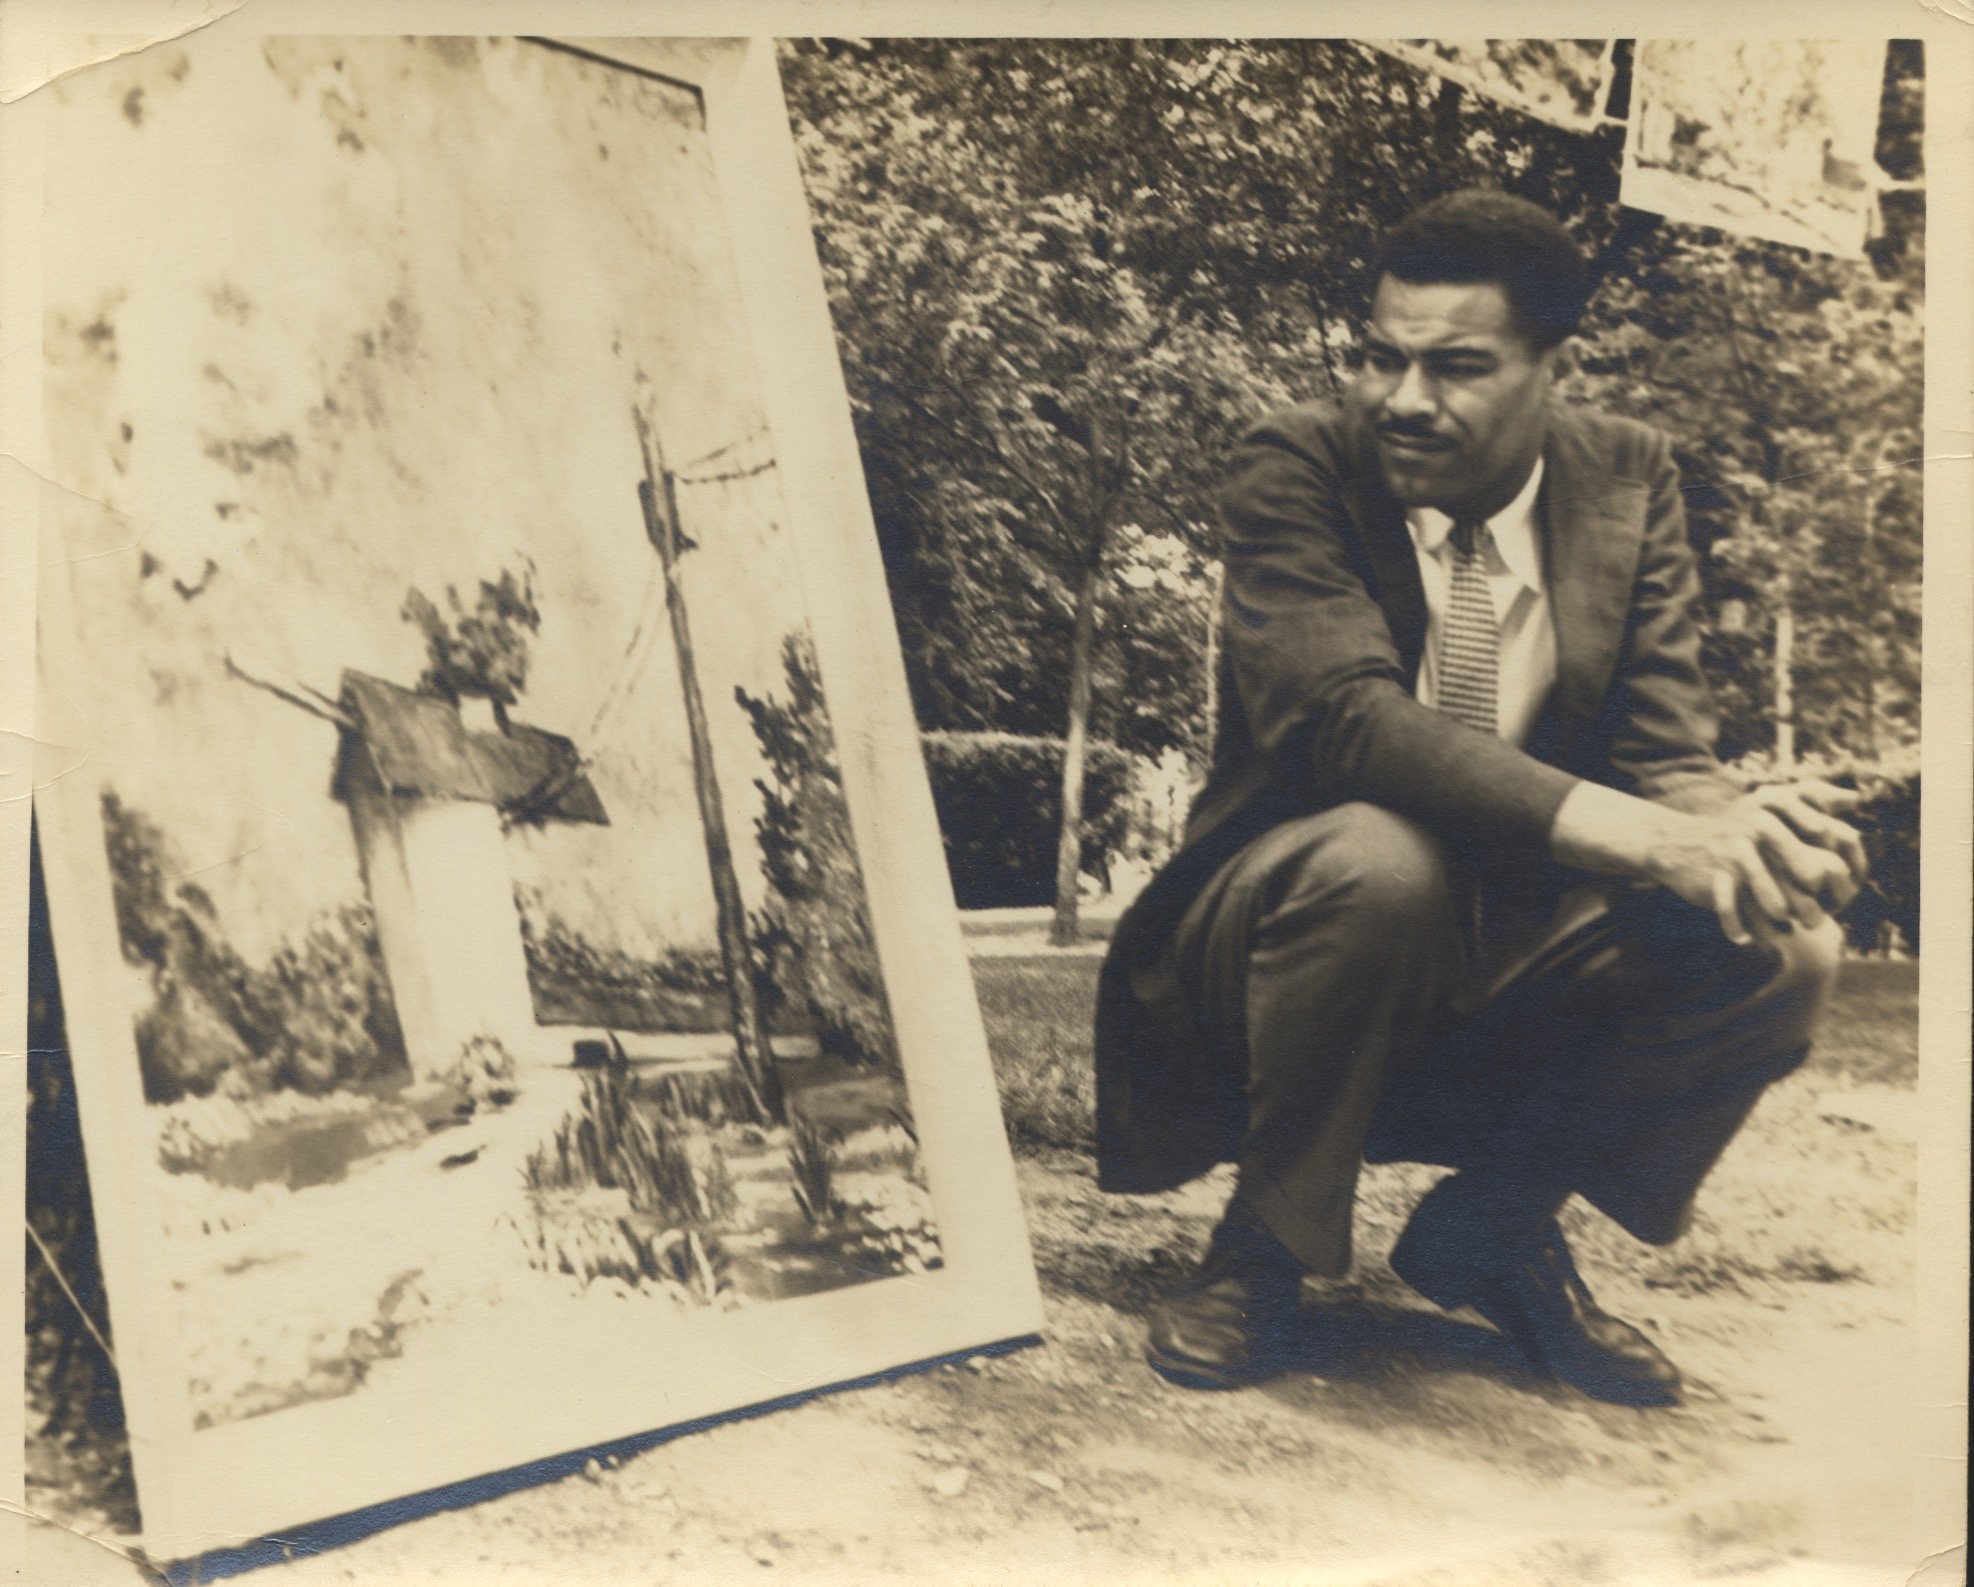 Paul Moses next to his painting "Ice House," c. 1956